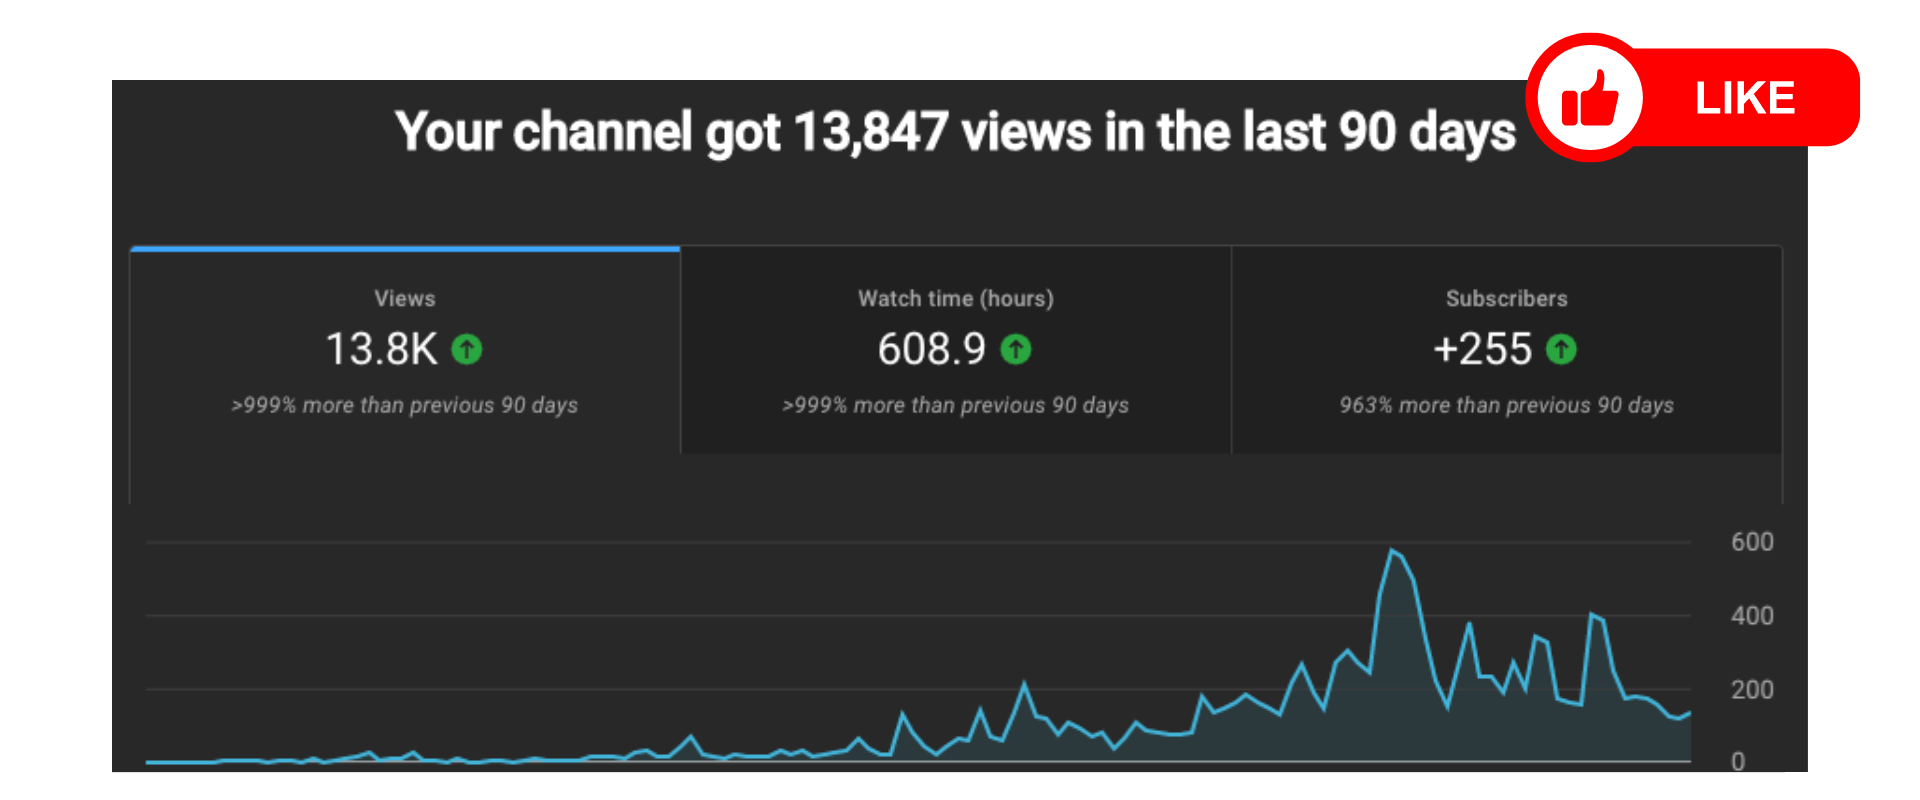 Youtube before and after channel optimisation